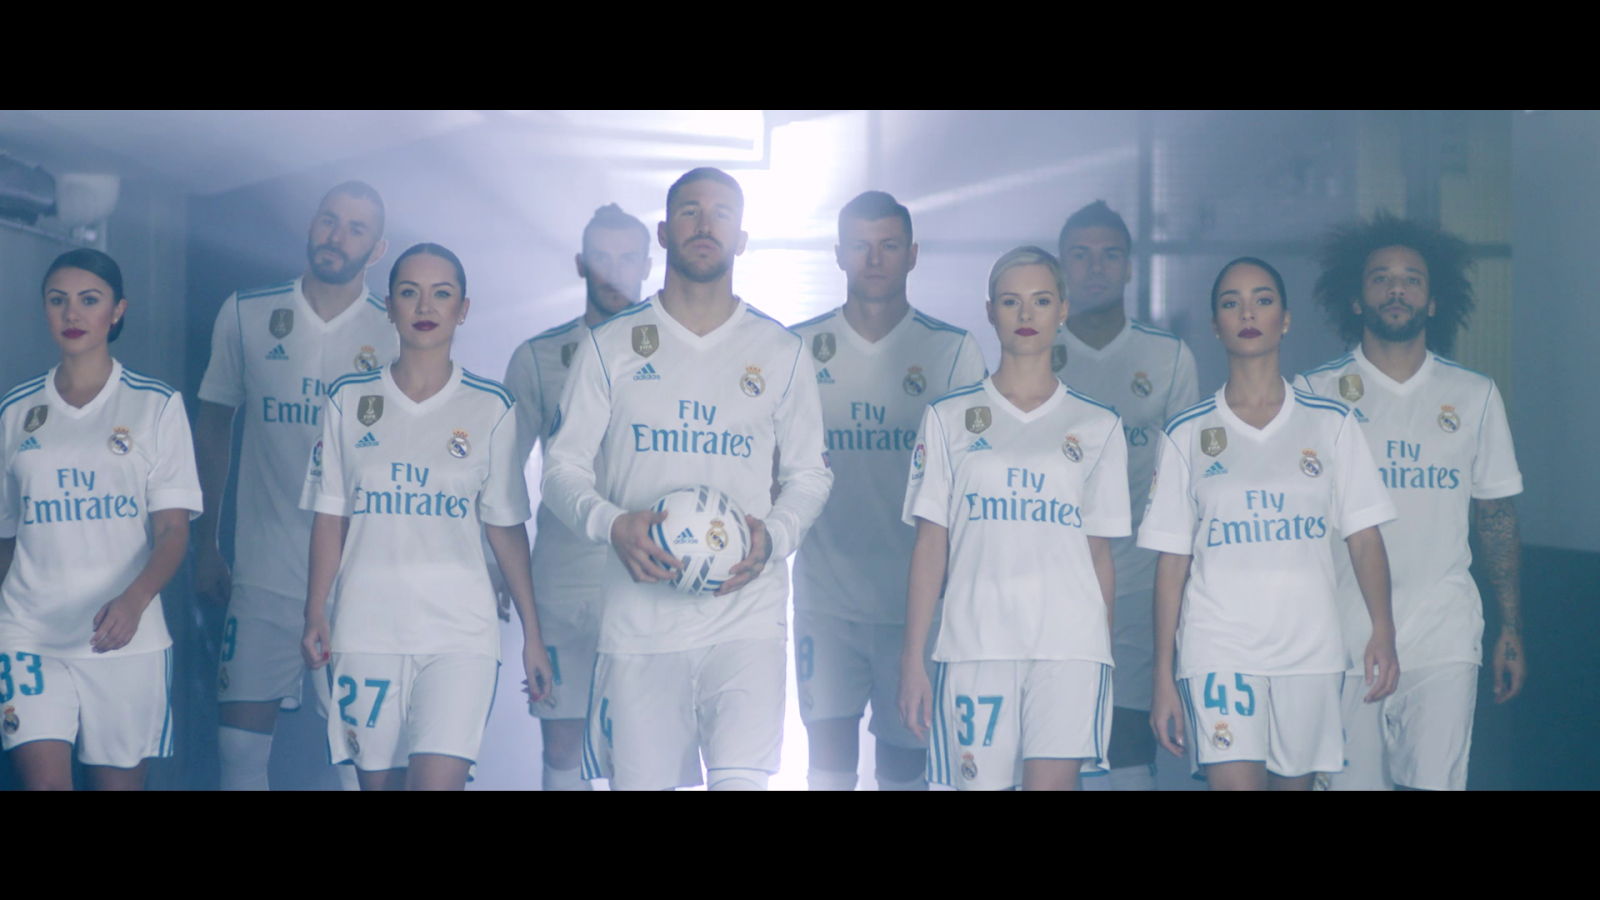 Emirates Launches New #OneTeam Video with Real Madrid Stars to Showcase Multi-Skilled Cabin Crew